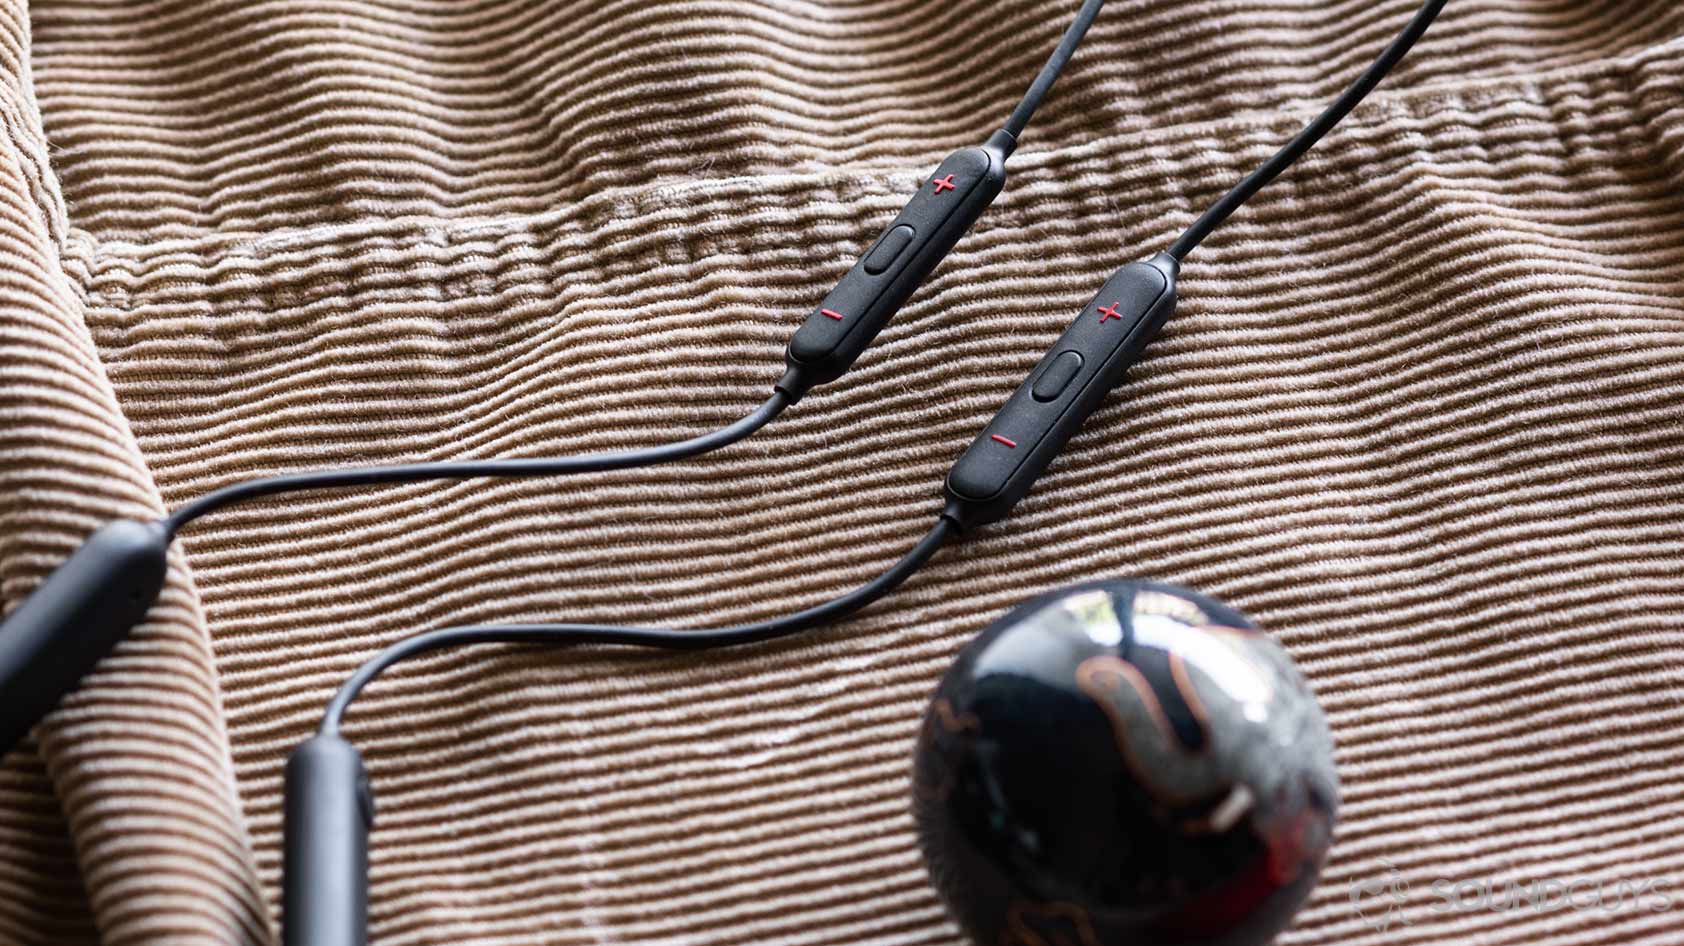 A picture of the OnePlus Bullets Wireless 2 next to the old Bullets Wireless remote and new one on corduroy jacket.